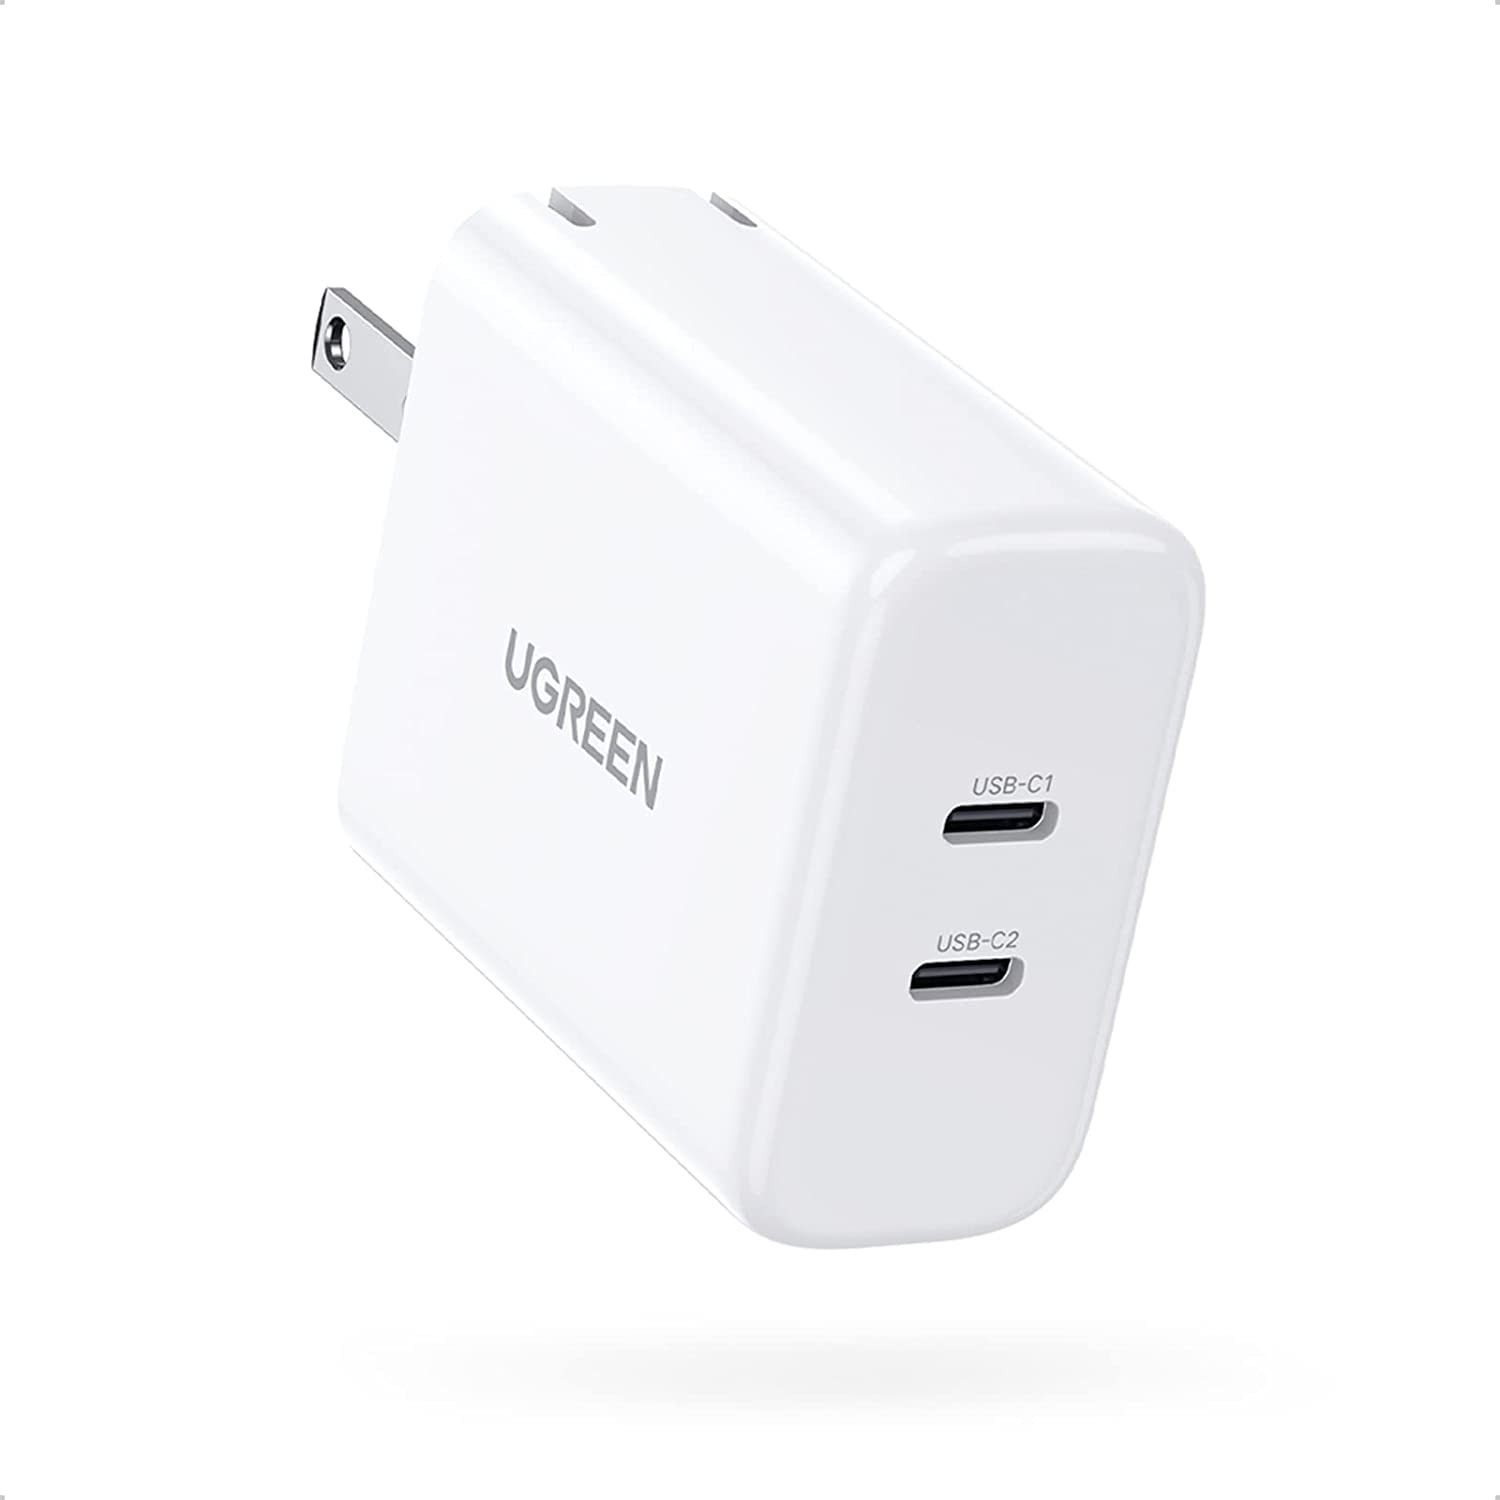 UGREEN 40W USB C Wall Charger $14.09 & other chargers and adapter + FS w/PRIME